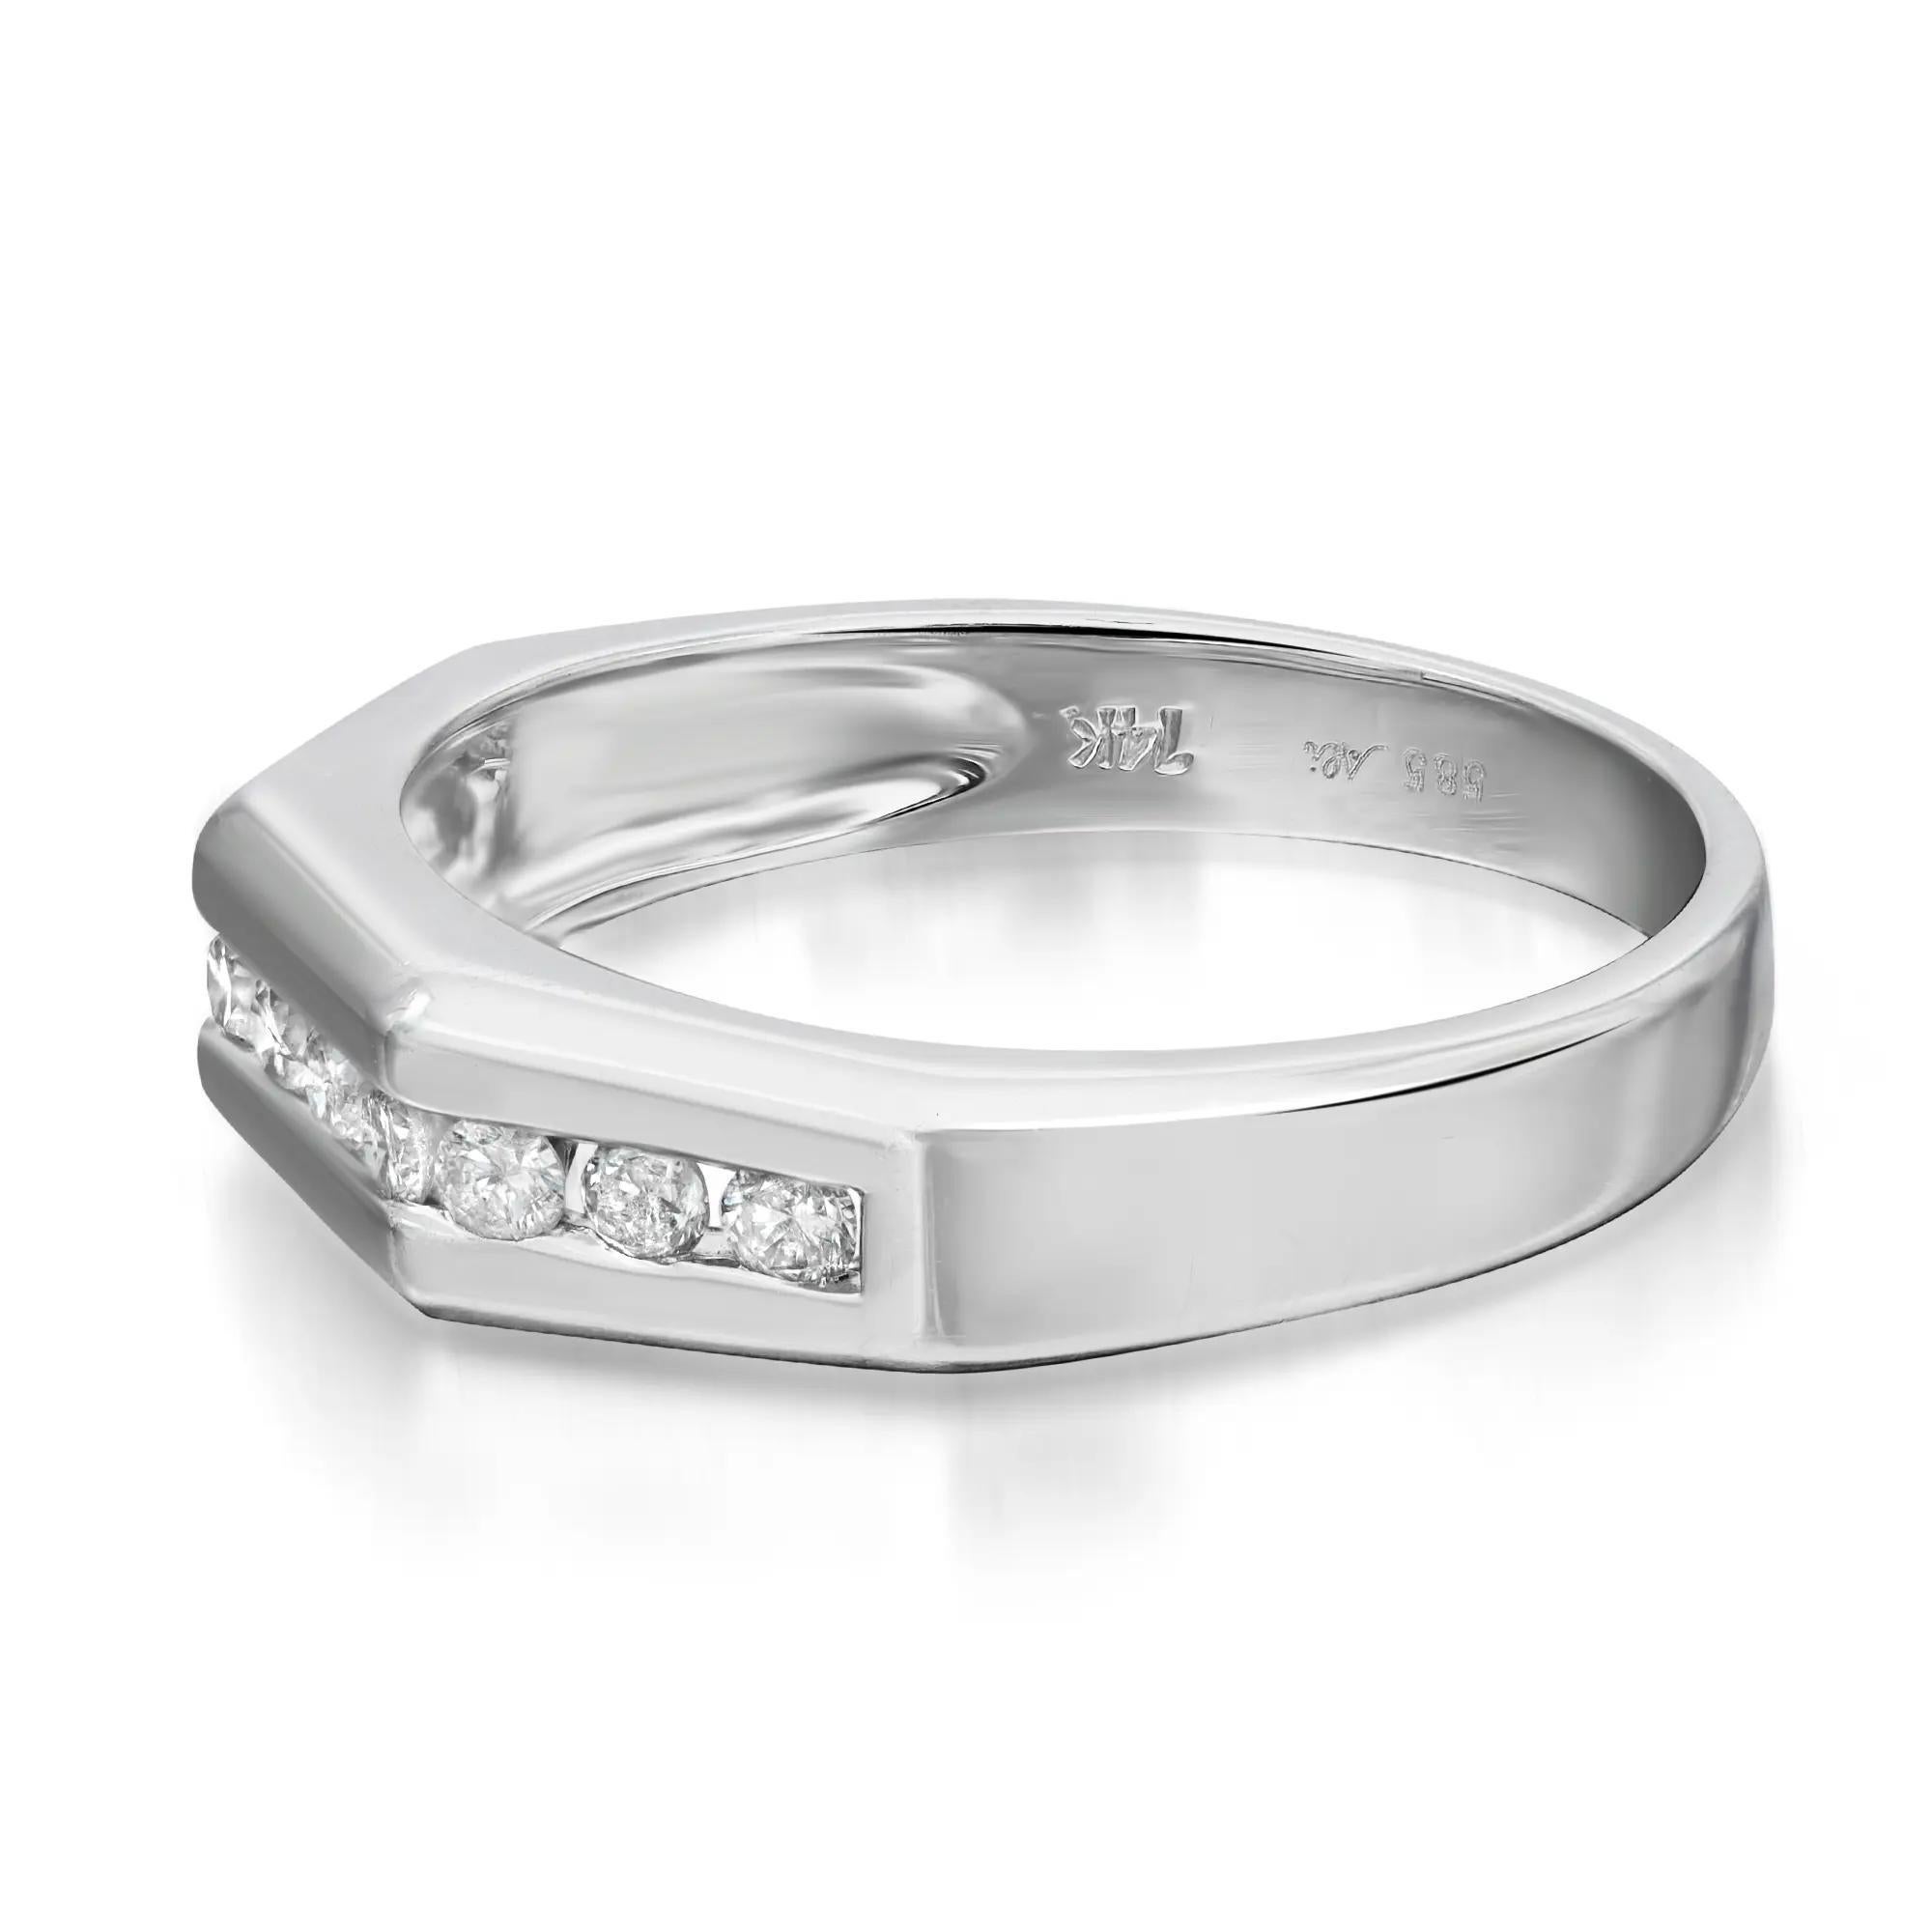 0.31Cttw Channel Set Round Diamond Wedding Band Ring 14K White Gold Size 7.5 In New Condition For Sale In New York, NY